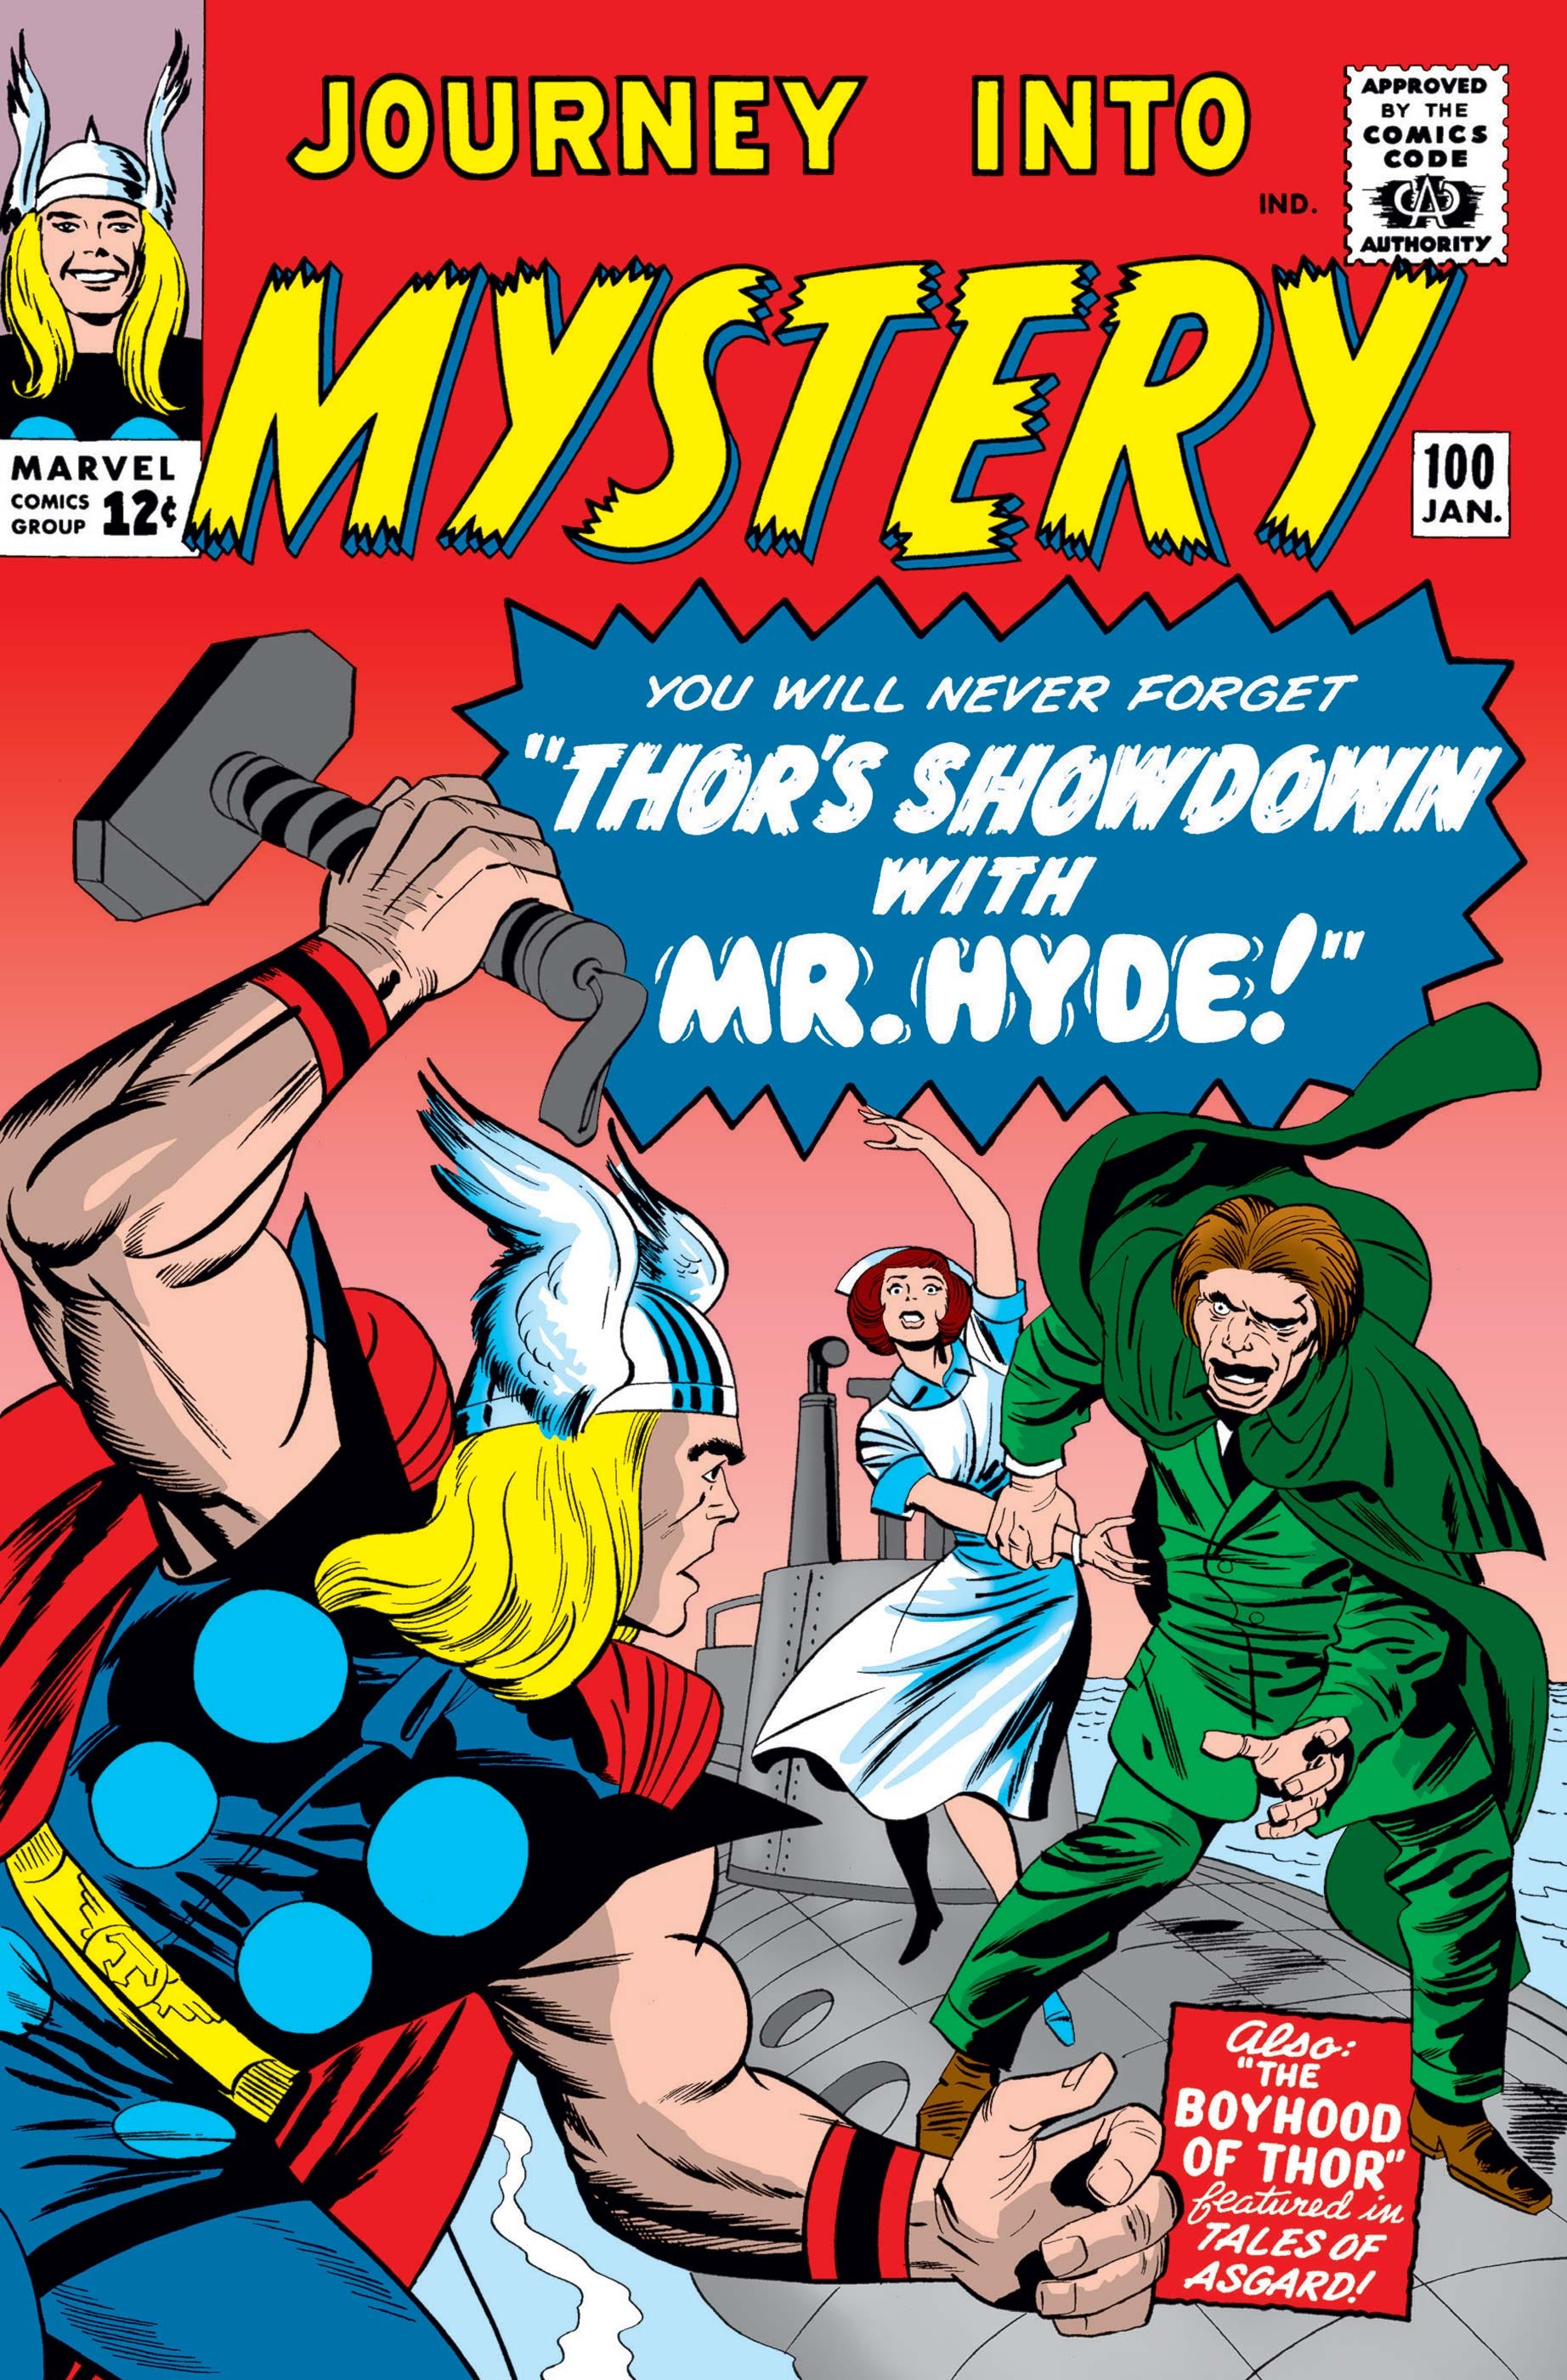 Episode 97: Two super-excuses (Journey Into Mystery #100 + Strange Tales #116 Part 1) -- January 1964